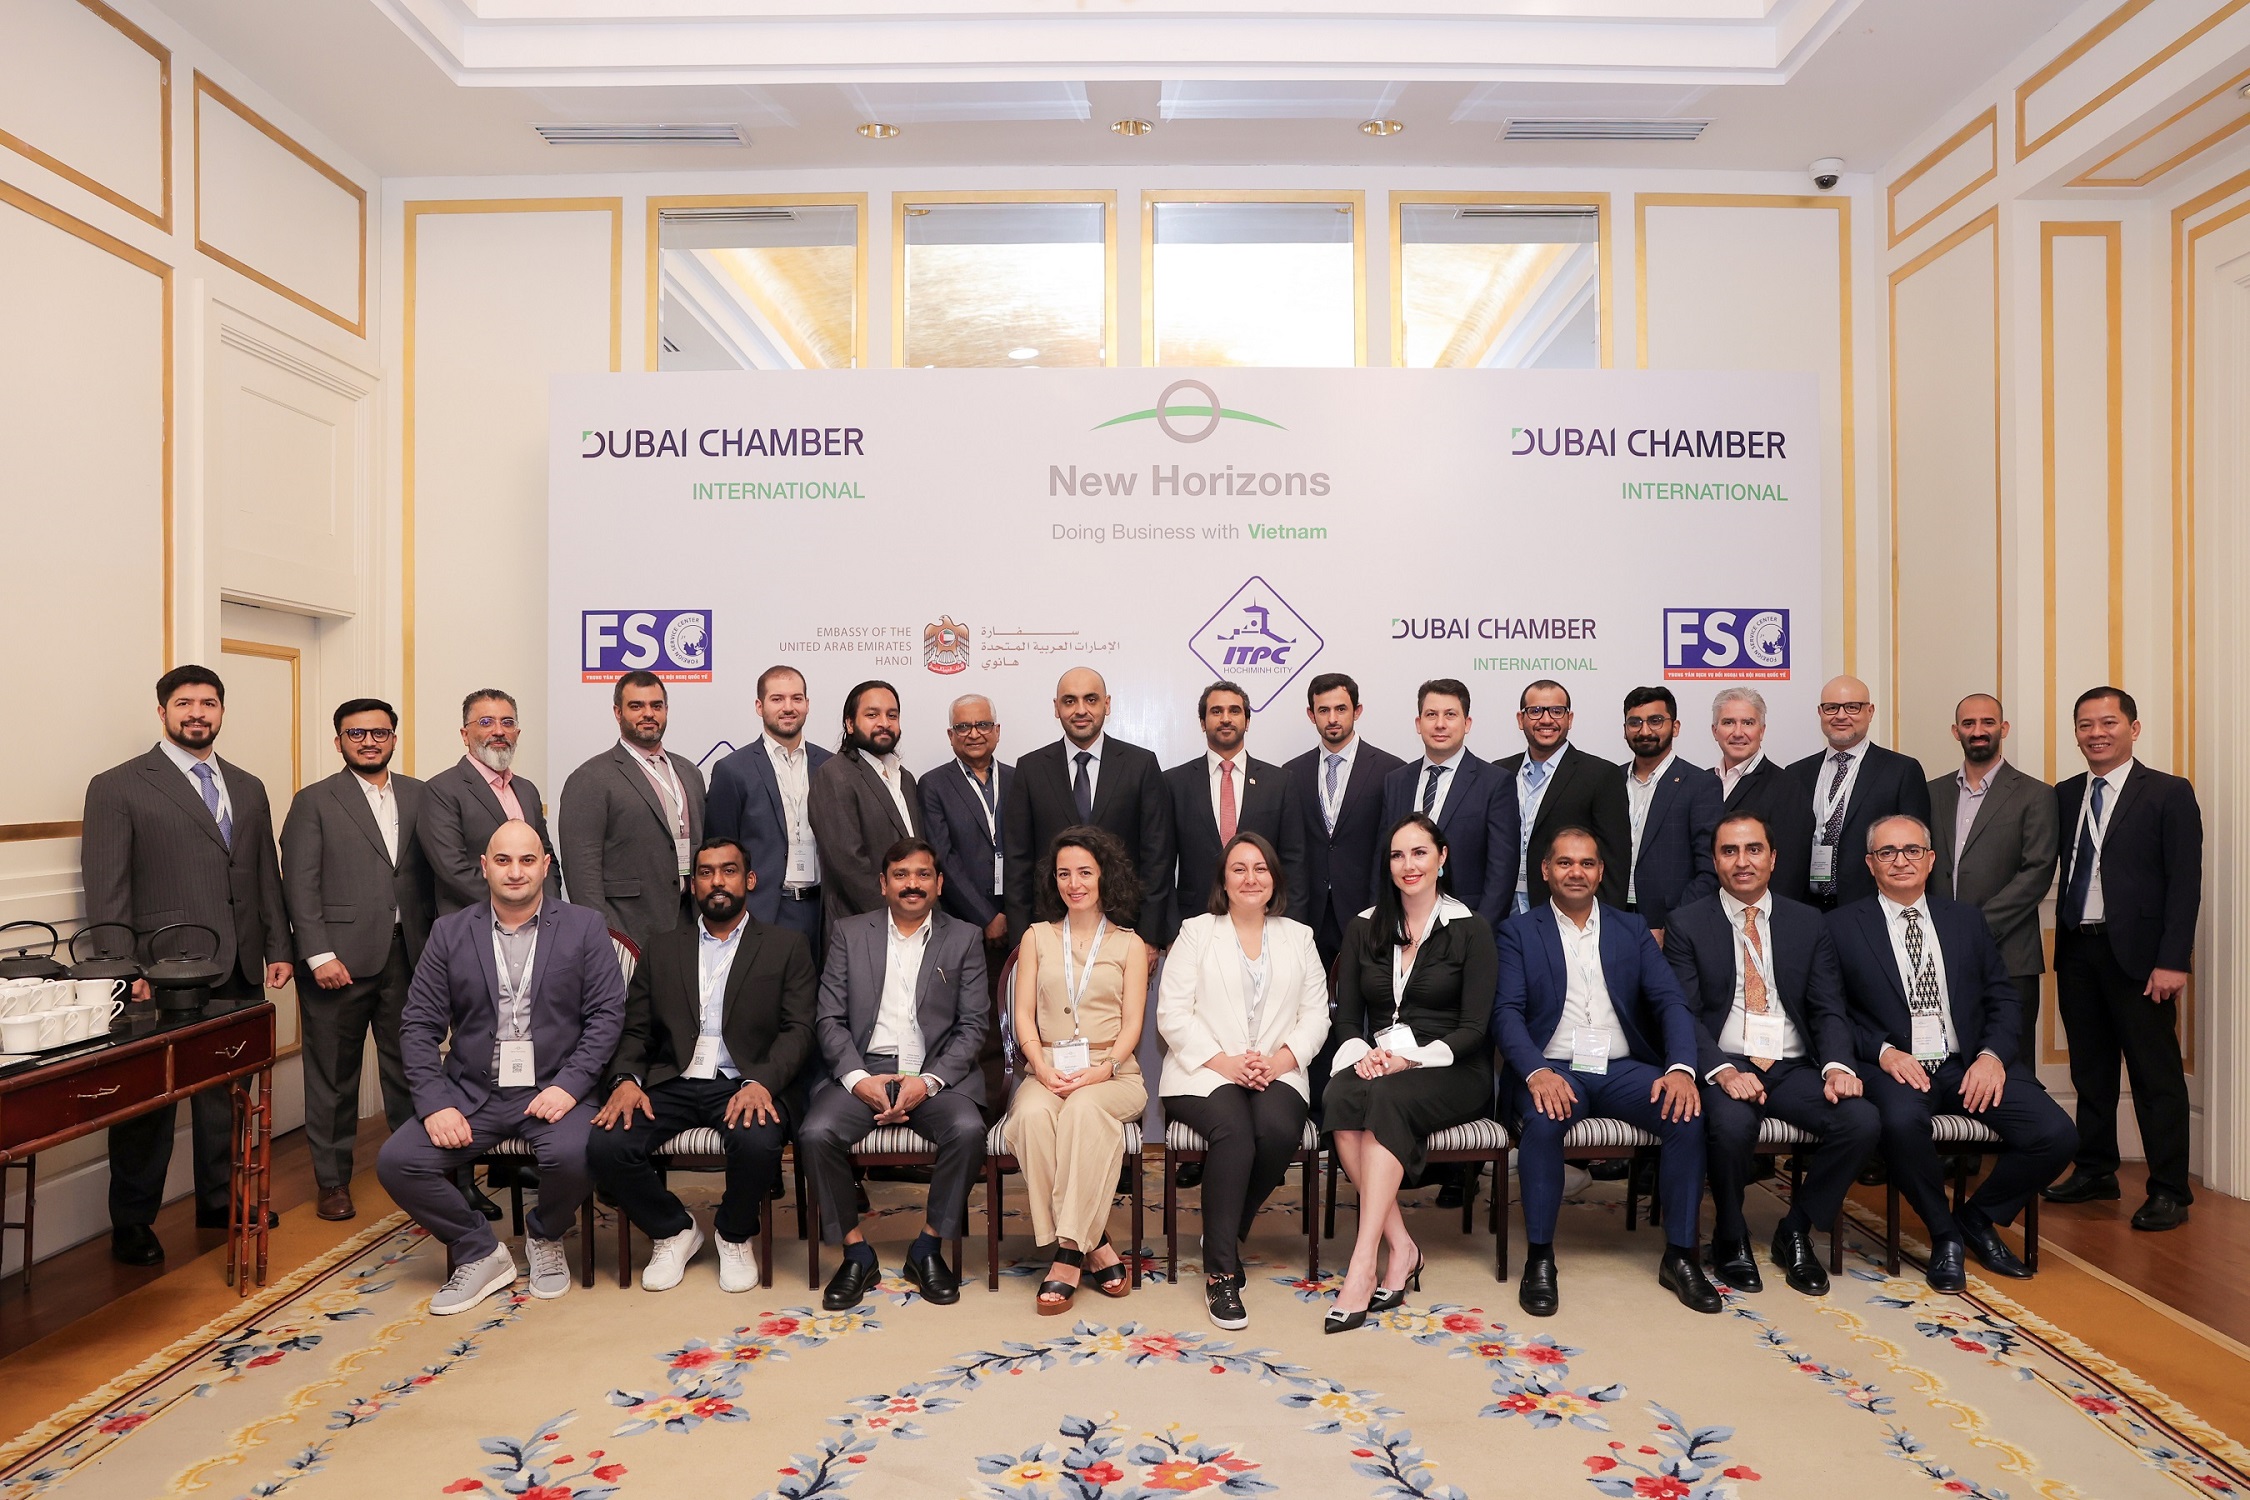 Dubai International Chamber concludes trade mission to Southeast Asia with 180 bilateral business meetings between companies from Dubai and Vietnam